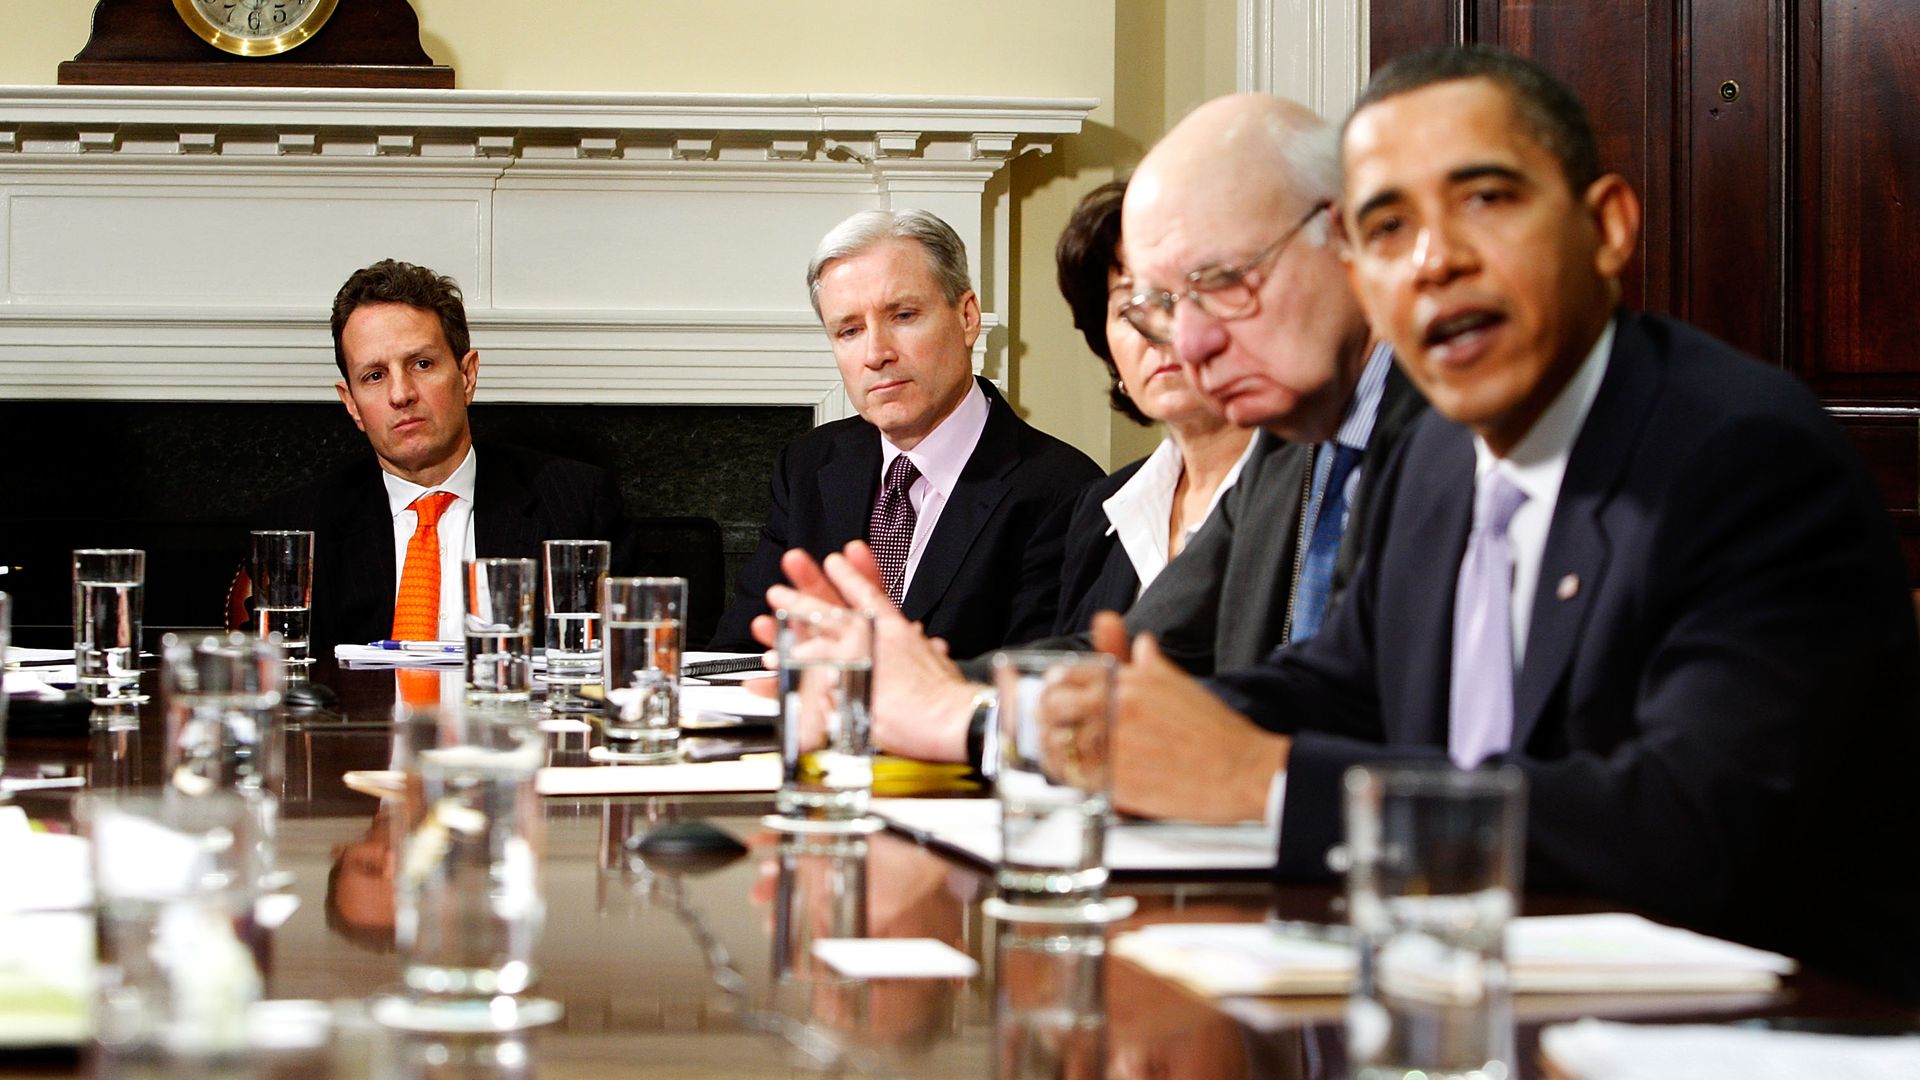 Mark Gallogly is seen sitting a table with President Obama.